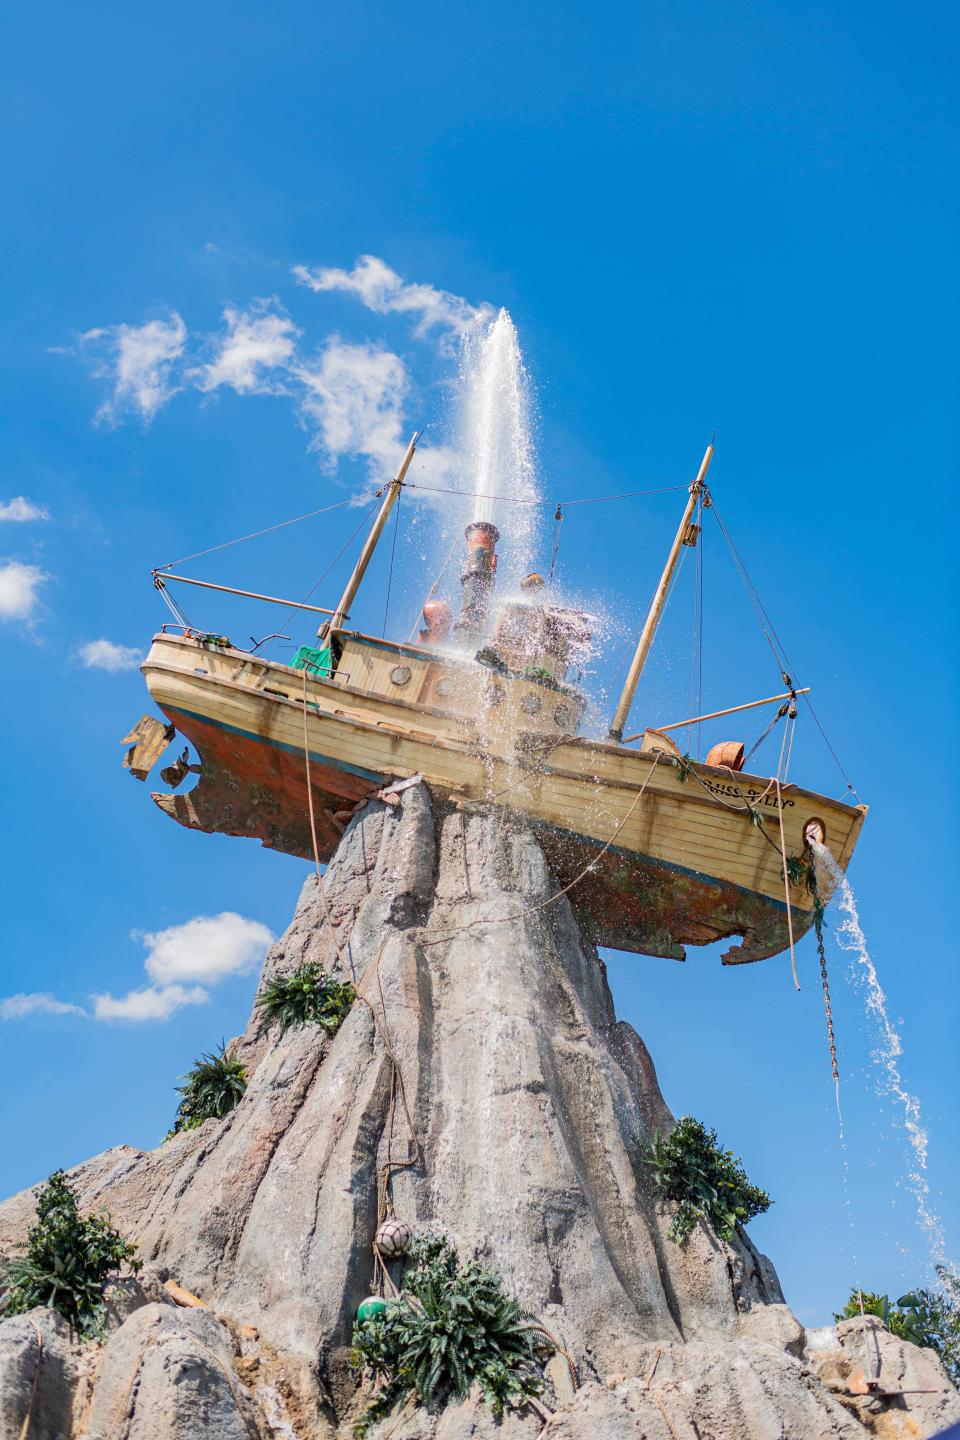 Disney’s Typhoon Lagoon Water Park reopened March 21, 2023 on a warm, sunny day at Walt Disney World Resort in Lake Buena Vista, Fla. Guests took part in thrilling water attractions, experiencing amazing food and beverage and enjoyed family fun. (Abigail Nilsson, photographer)